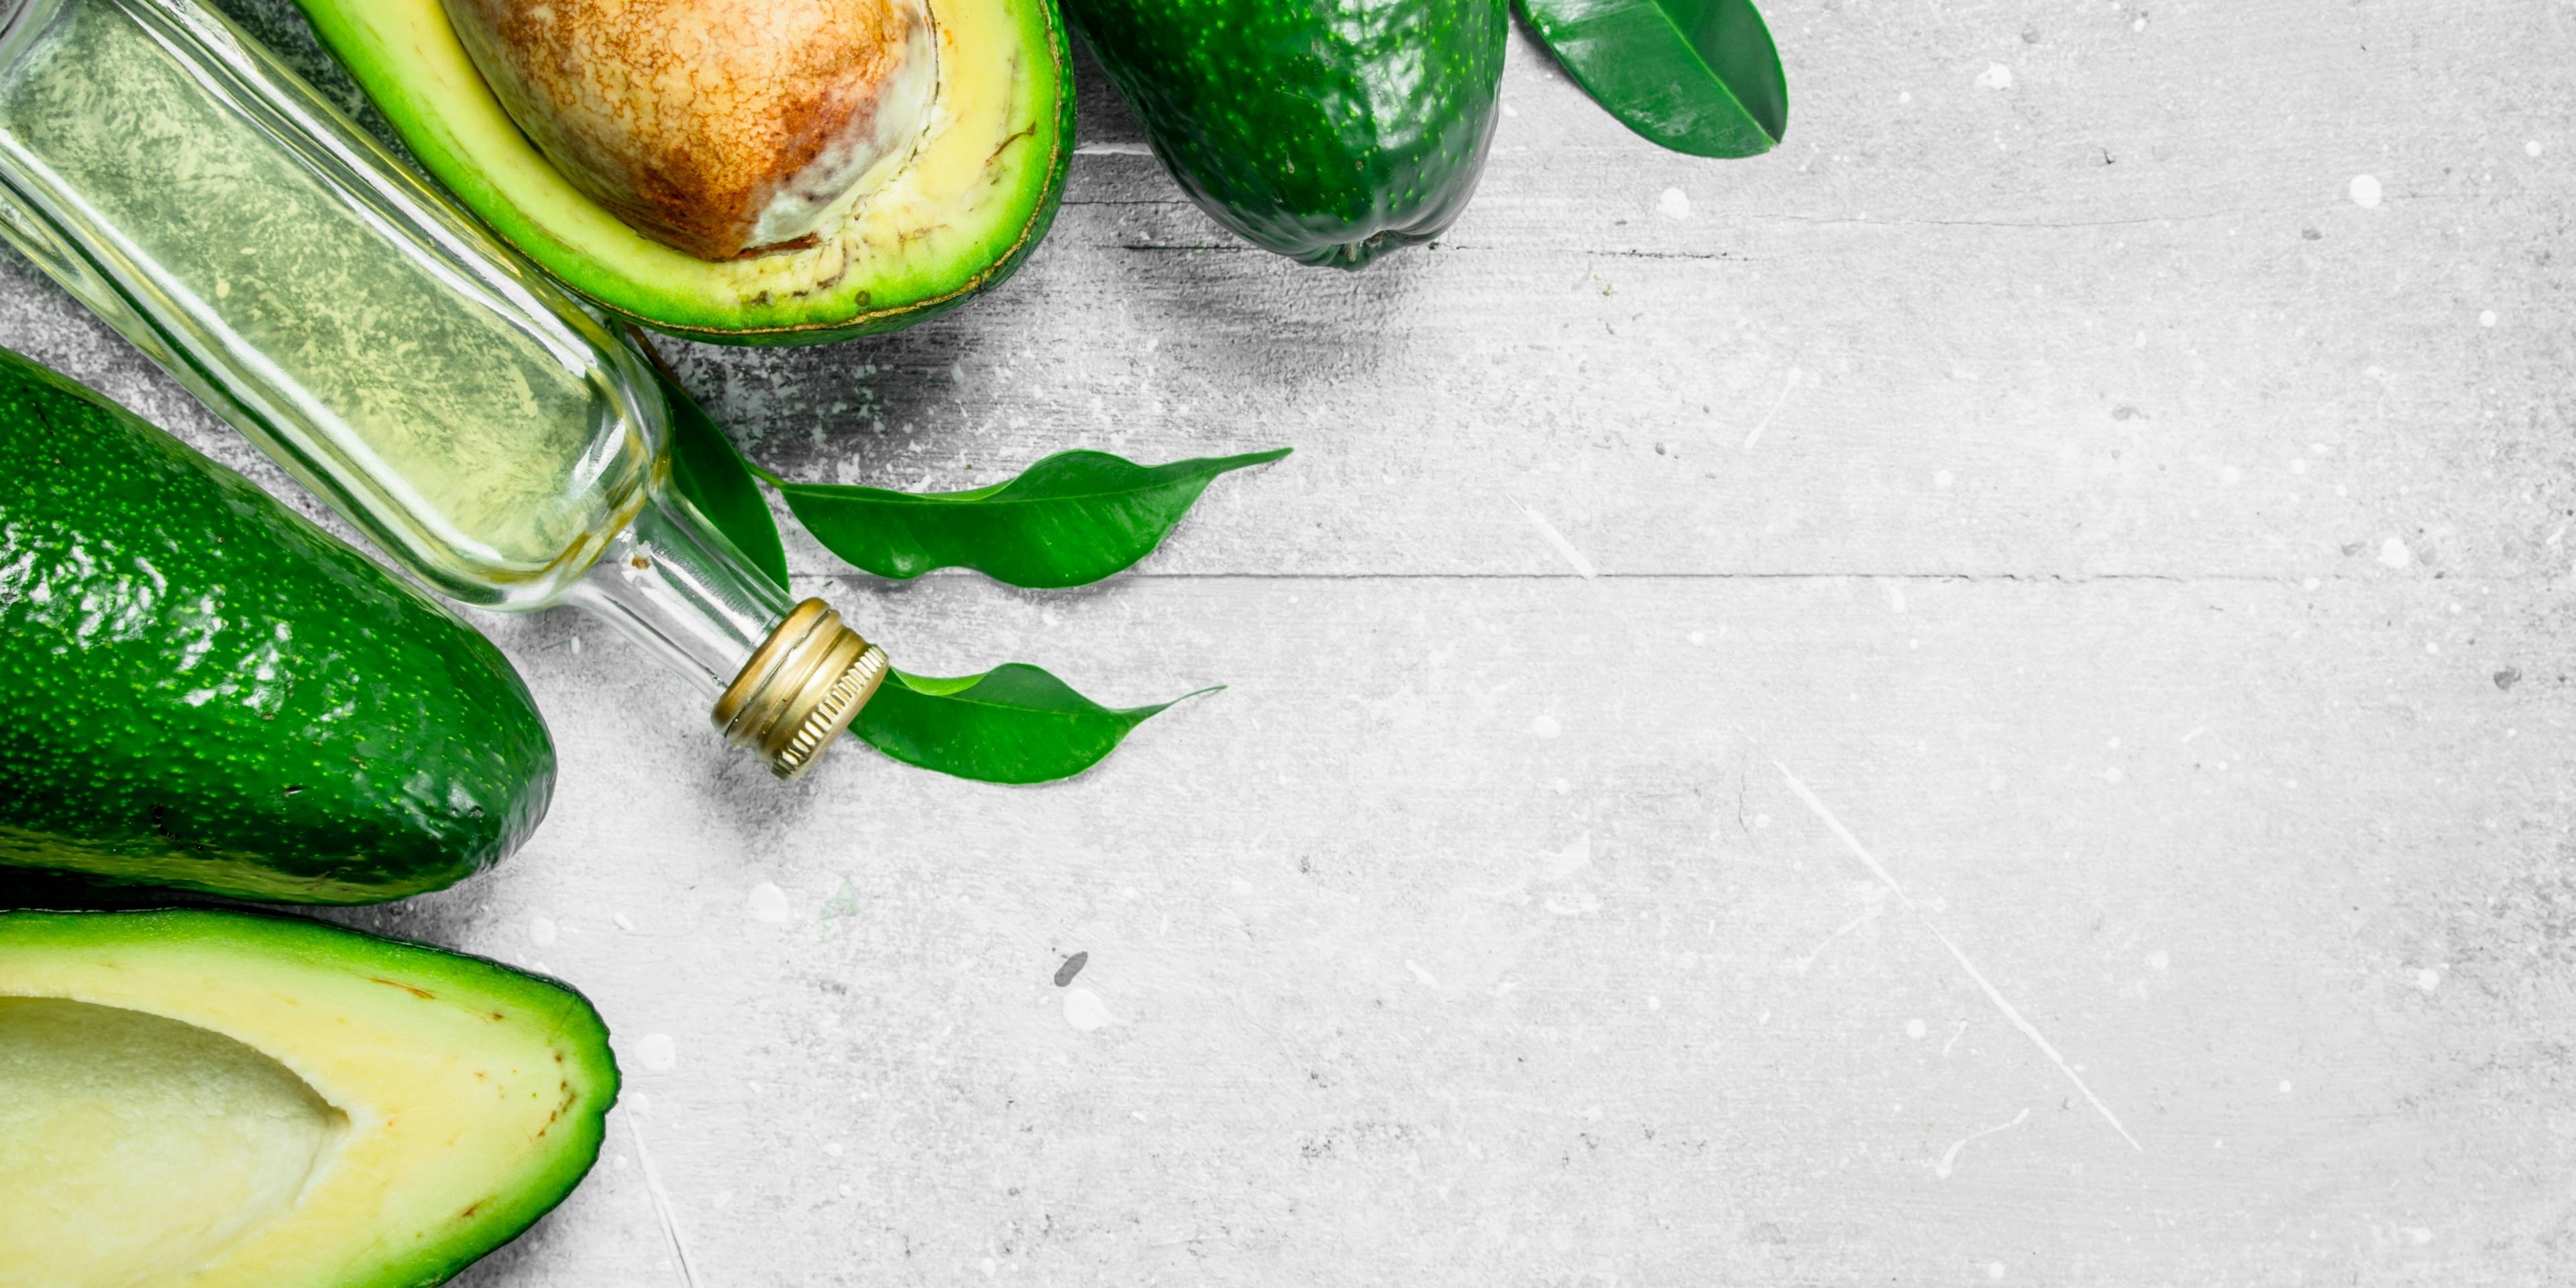 Oil bottle surrounded by avocados